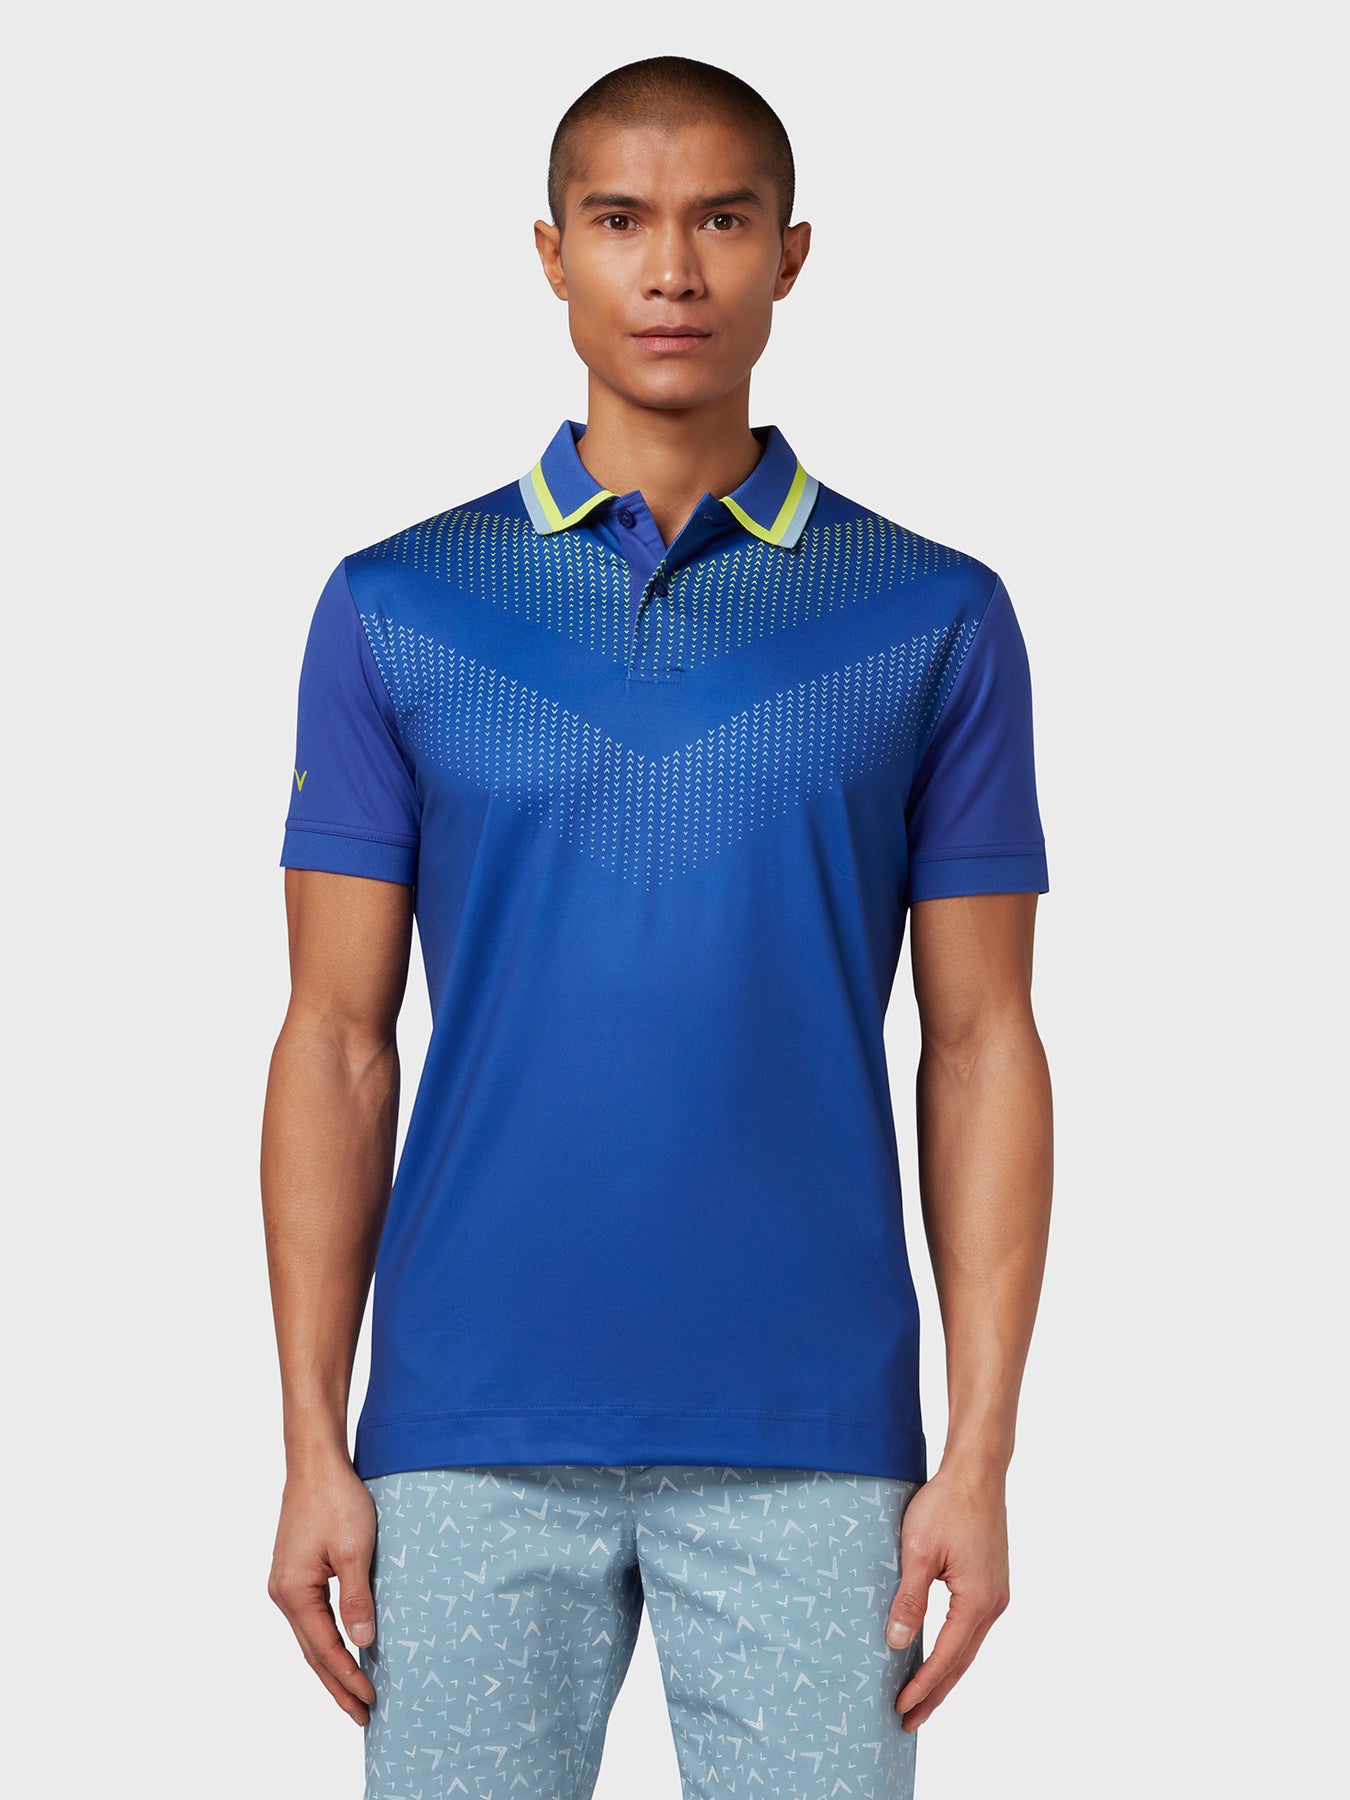 View X Series Ombre Chev Print Polo In Clematis Blue information